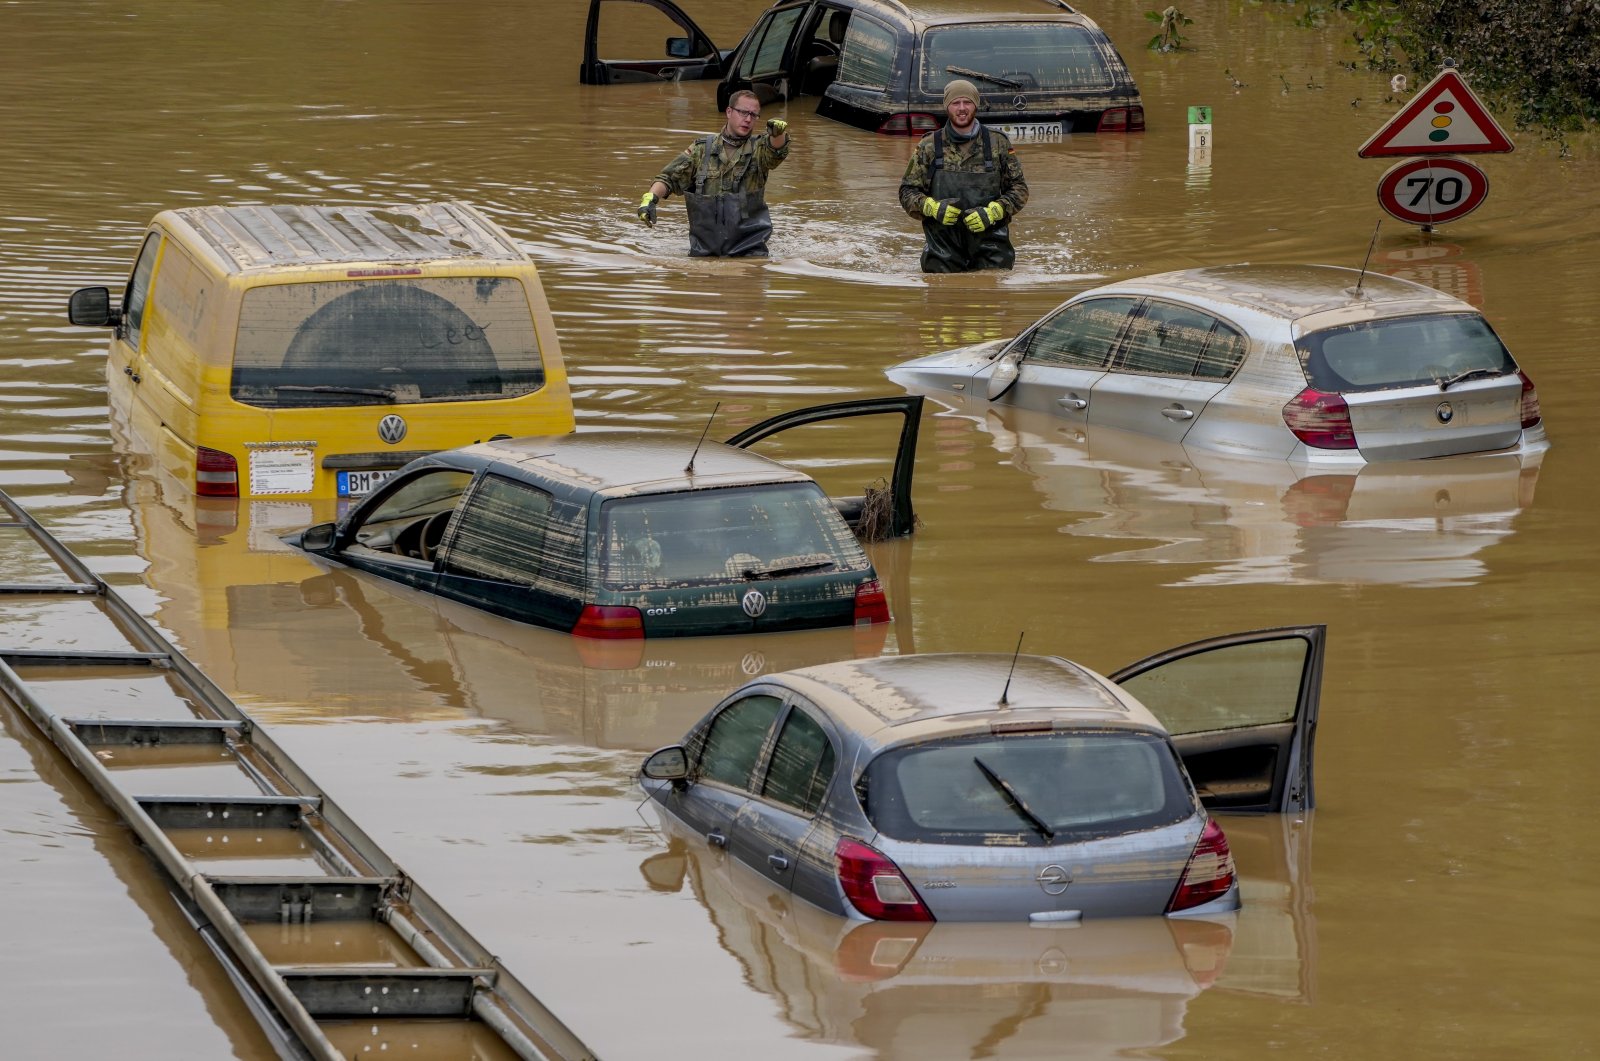 People check for victims in flooded cars on a road in Erftstadt, Germany, following heavy rainfall that broke the banks of the Erft river, causing extensive damage, July 17, 2021. (AP File Photo)